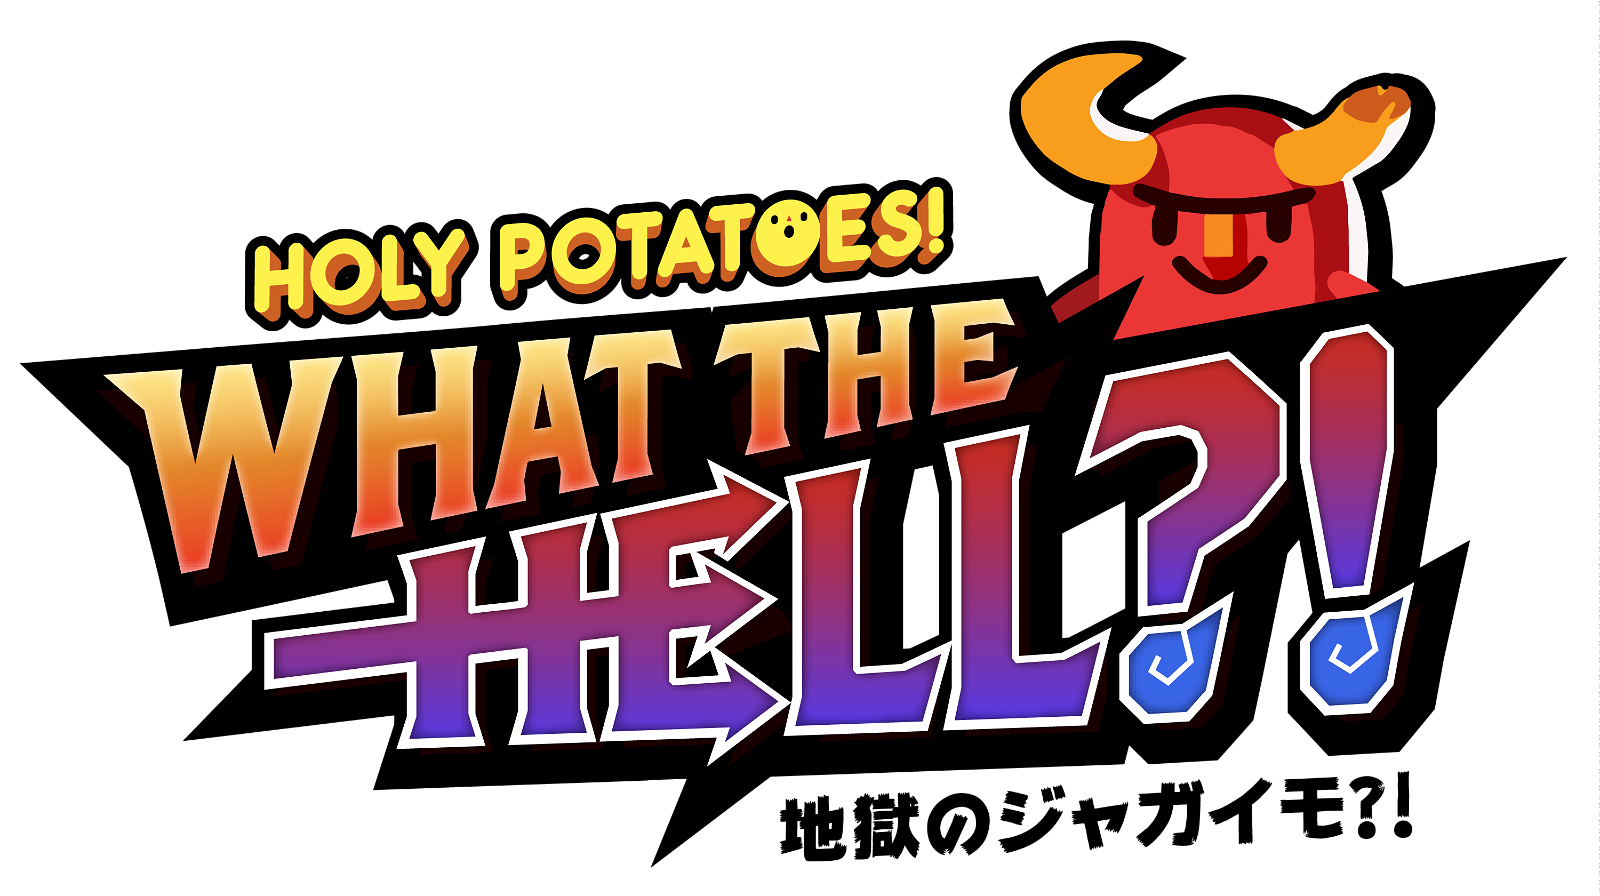 Image of Holy Potatoes! What the Hell?!